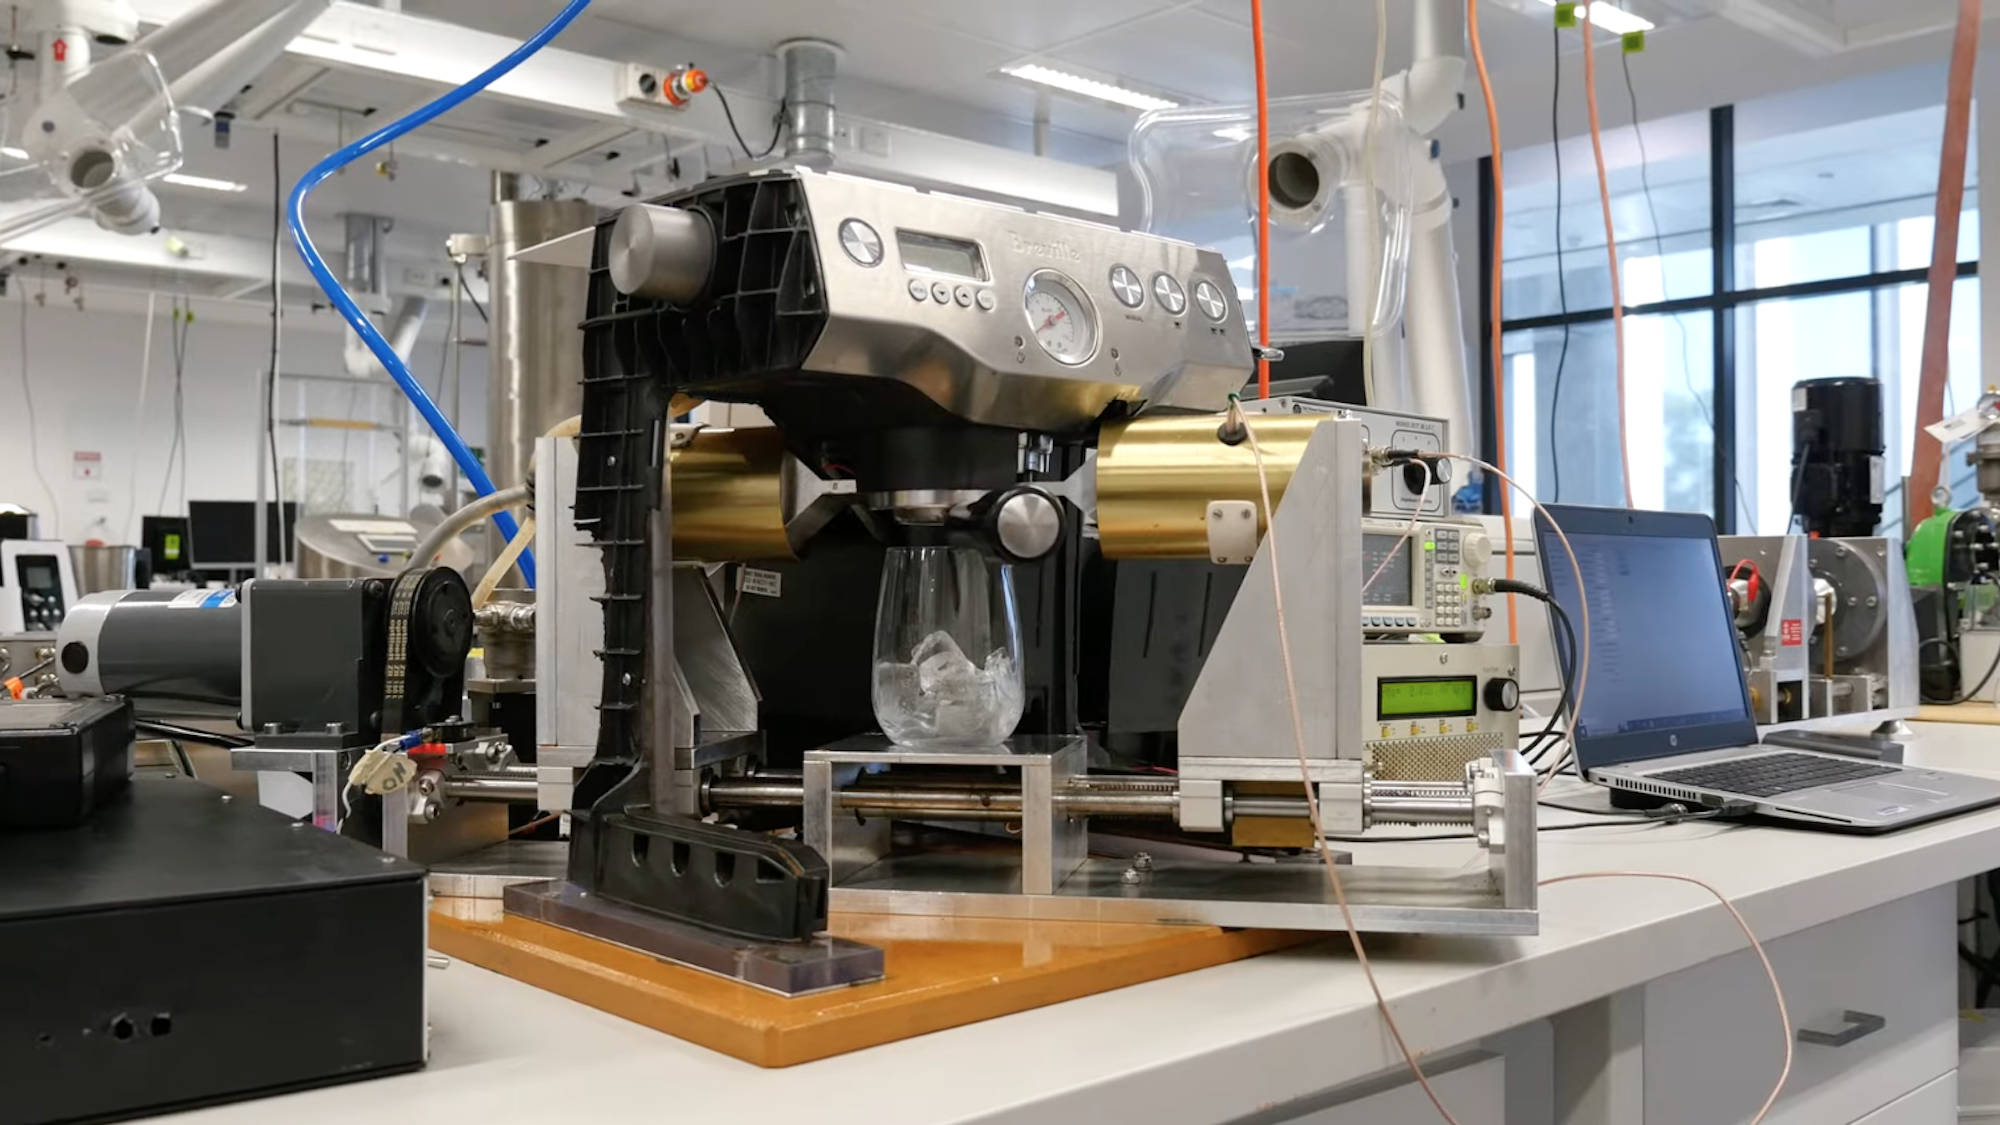 Blasting coffee grounds with ultrasonic waves creates a 60-second cold brew